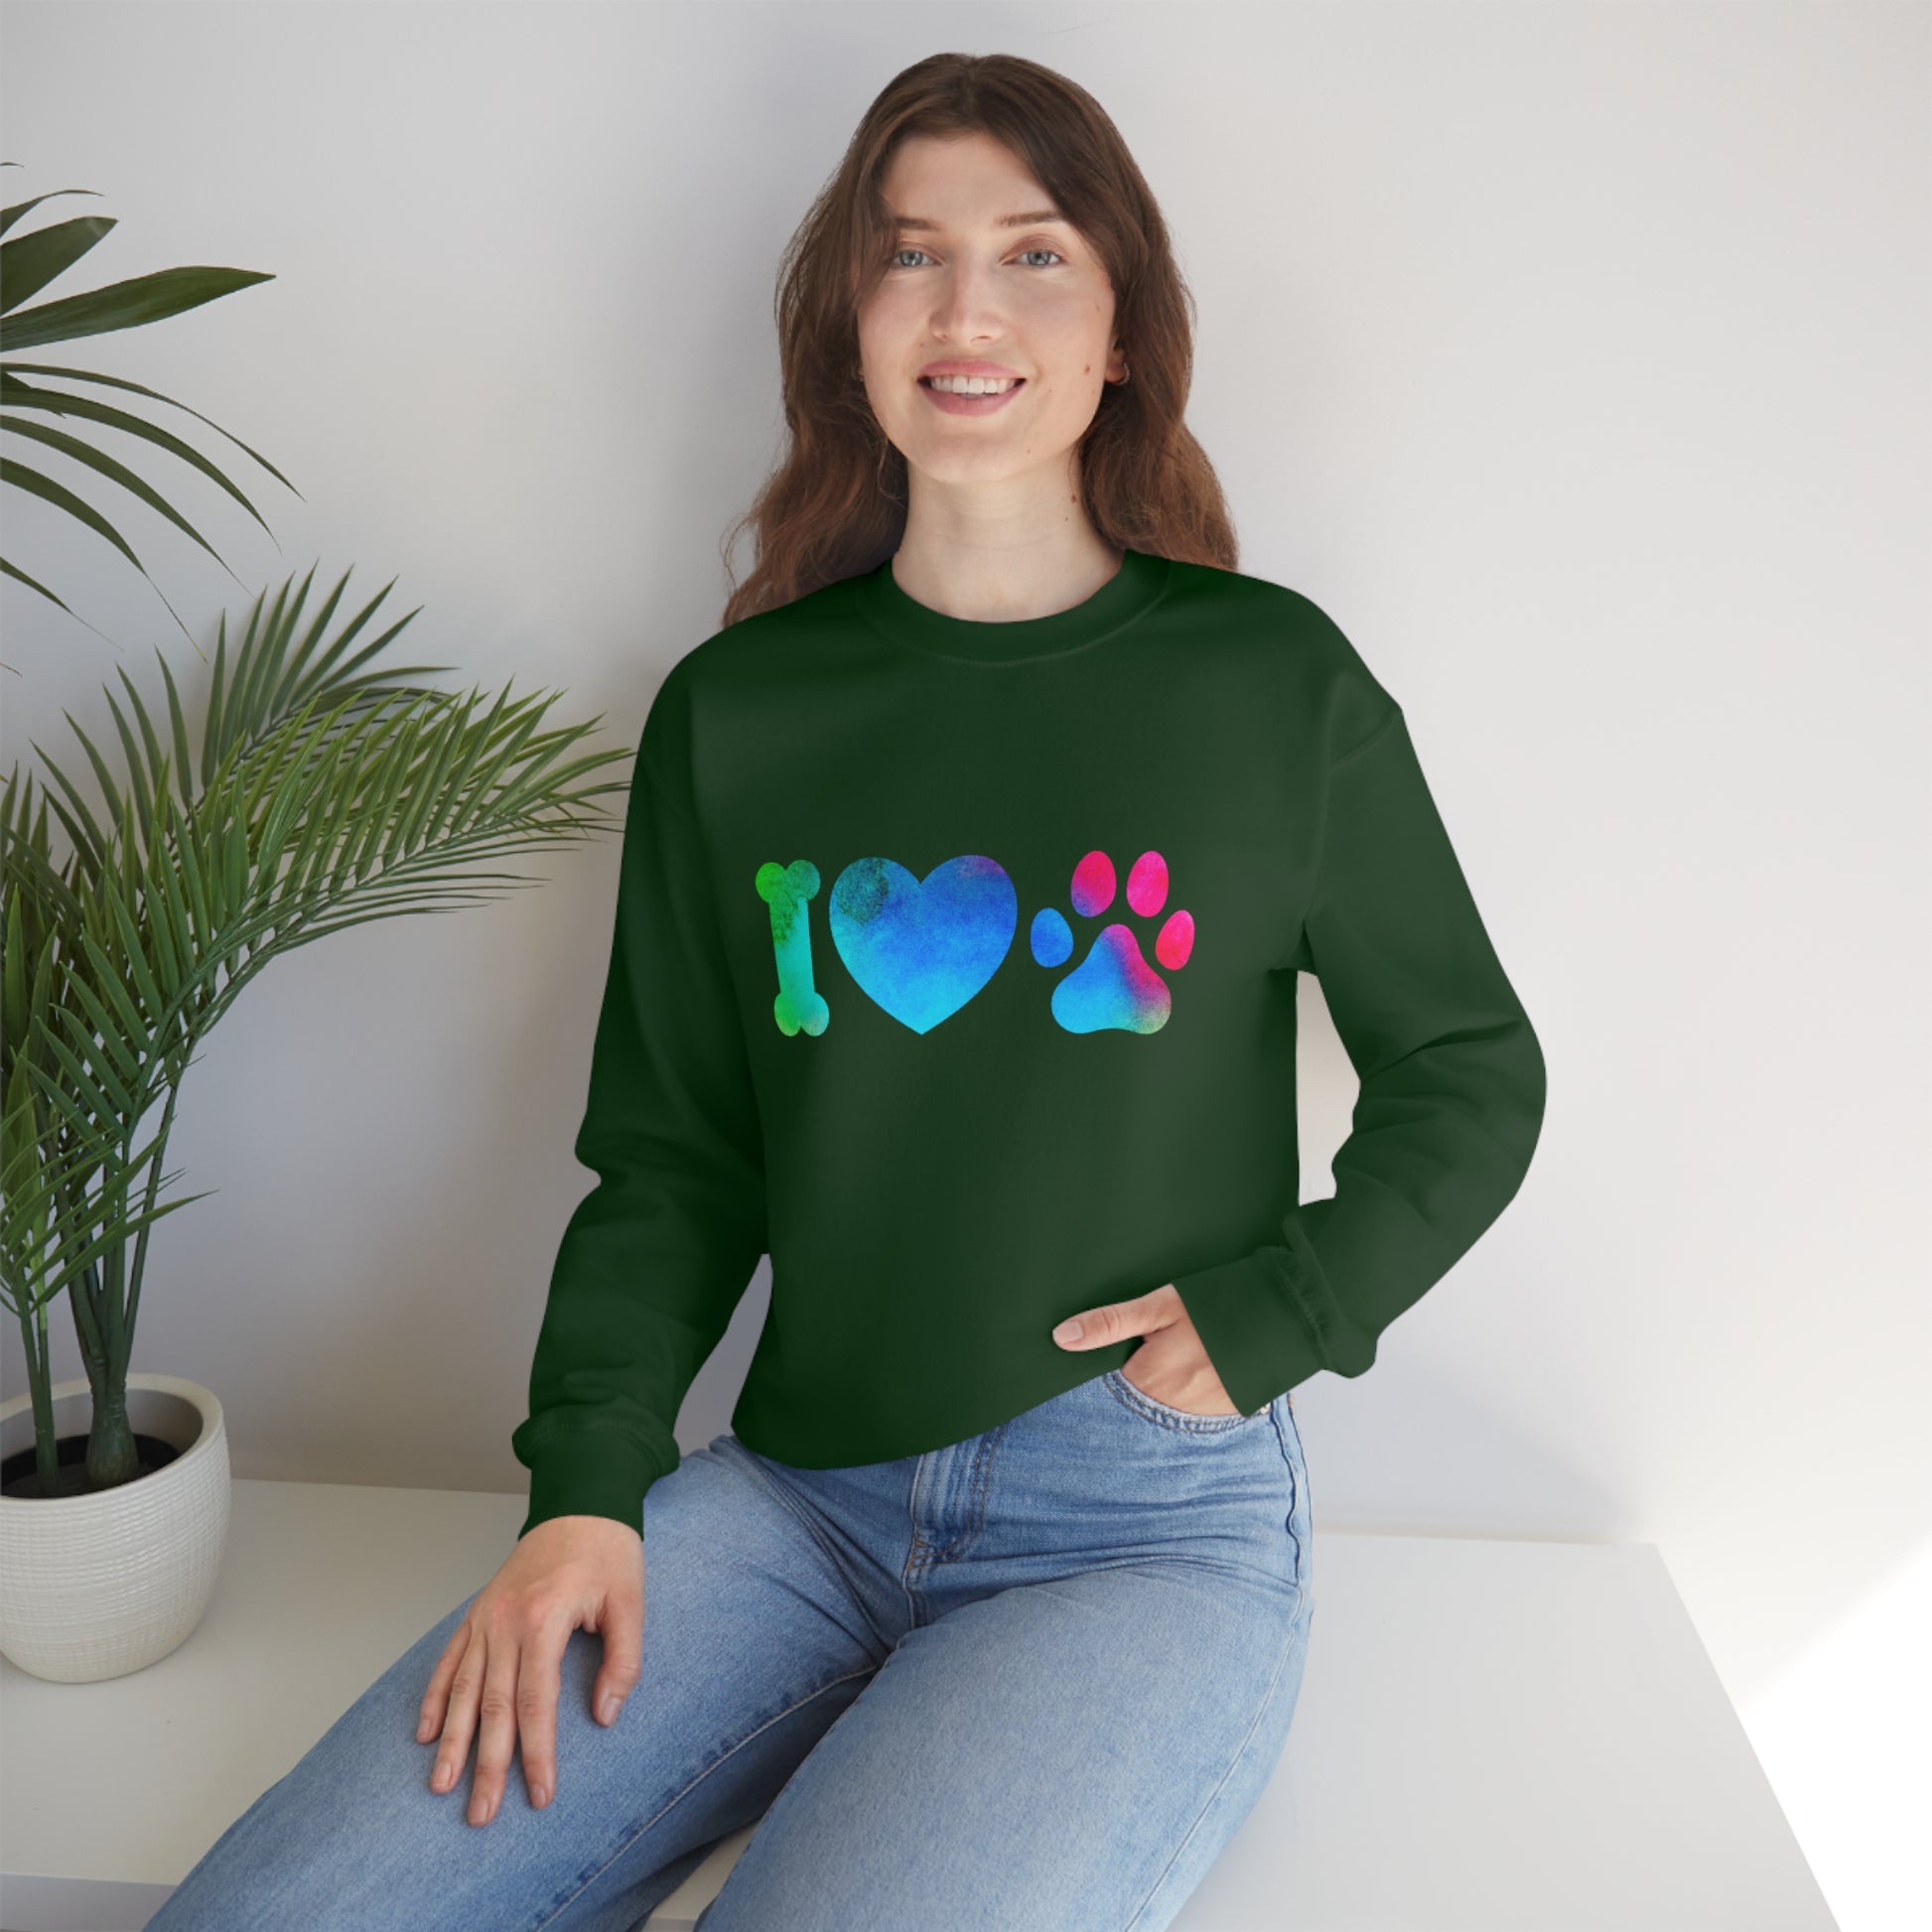 Mock up of a woman wearing the Forest Green sweatshirt while sitting on a surface